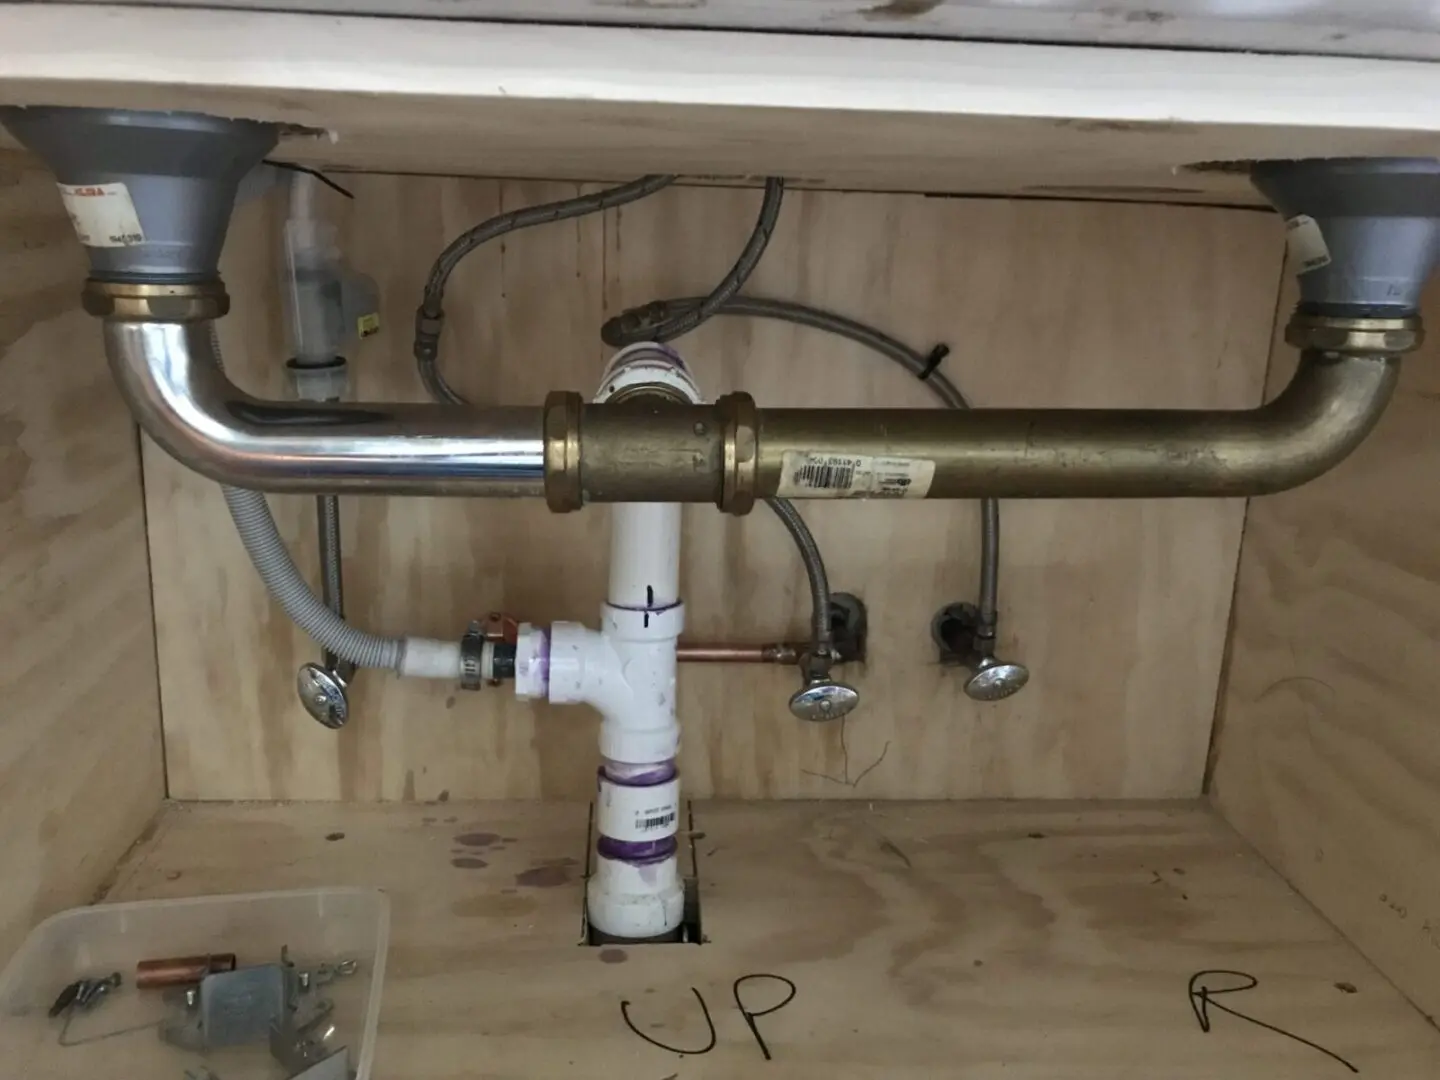 A sink under a wooden cabinet with pipes and pipes.